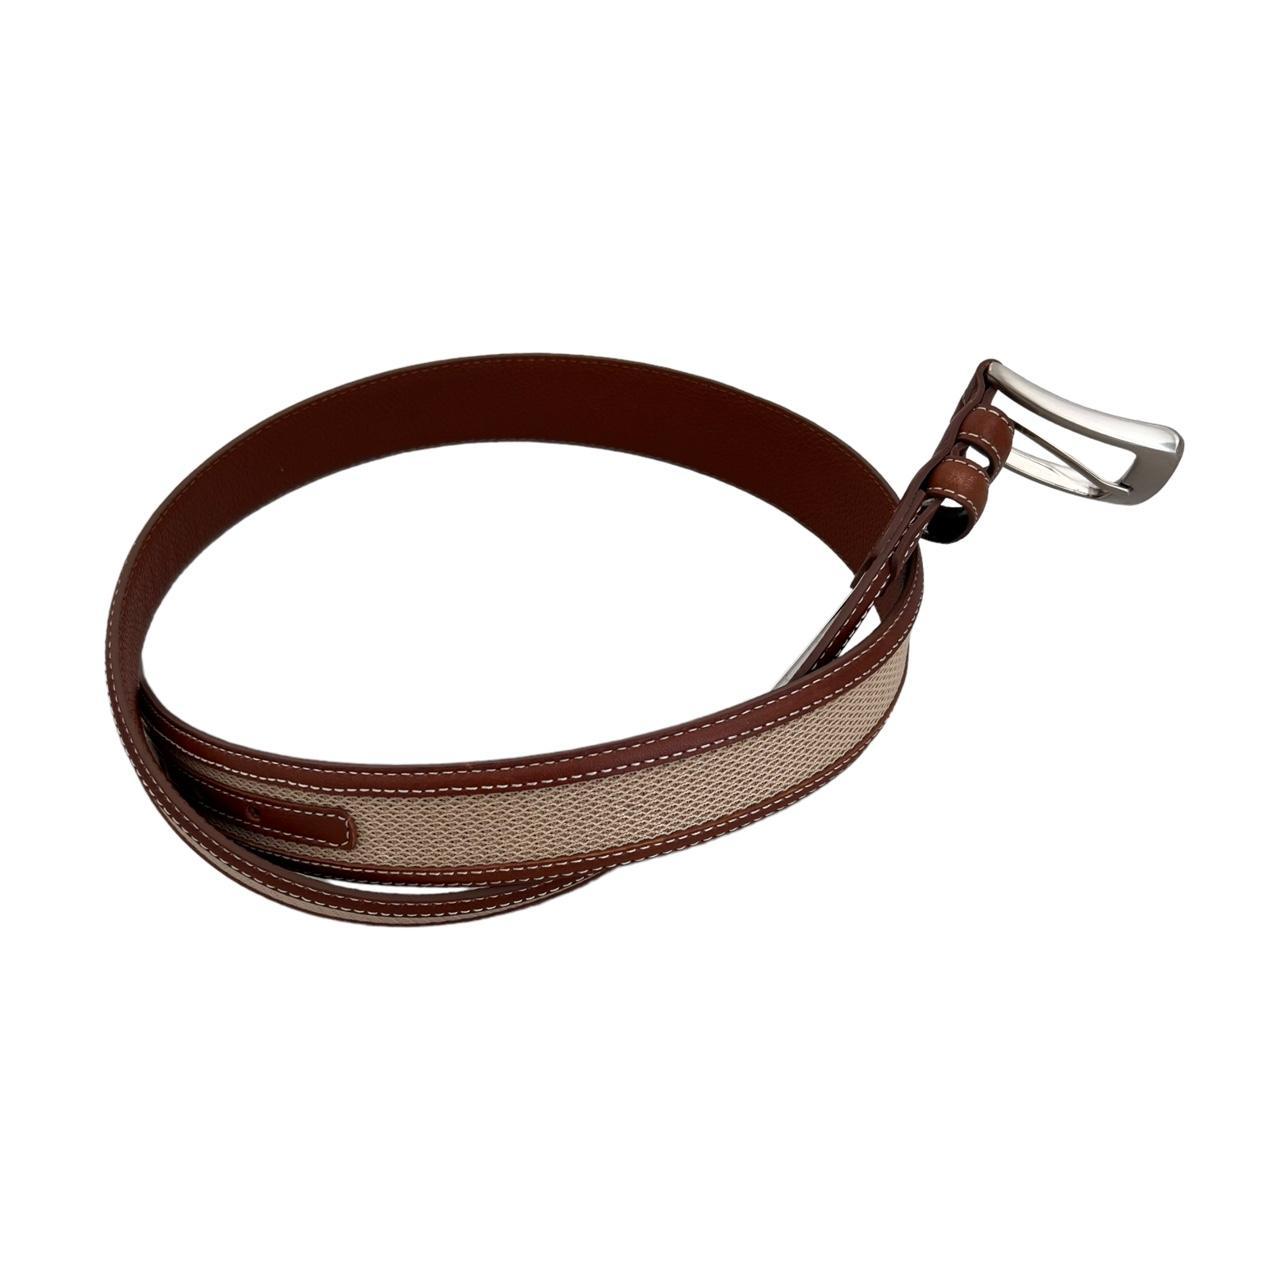 Product Image 1 - JOS A BANK BELT
BRAND NEW